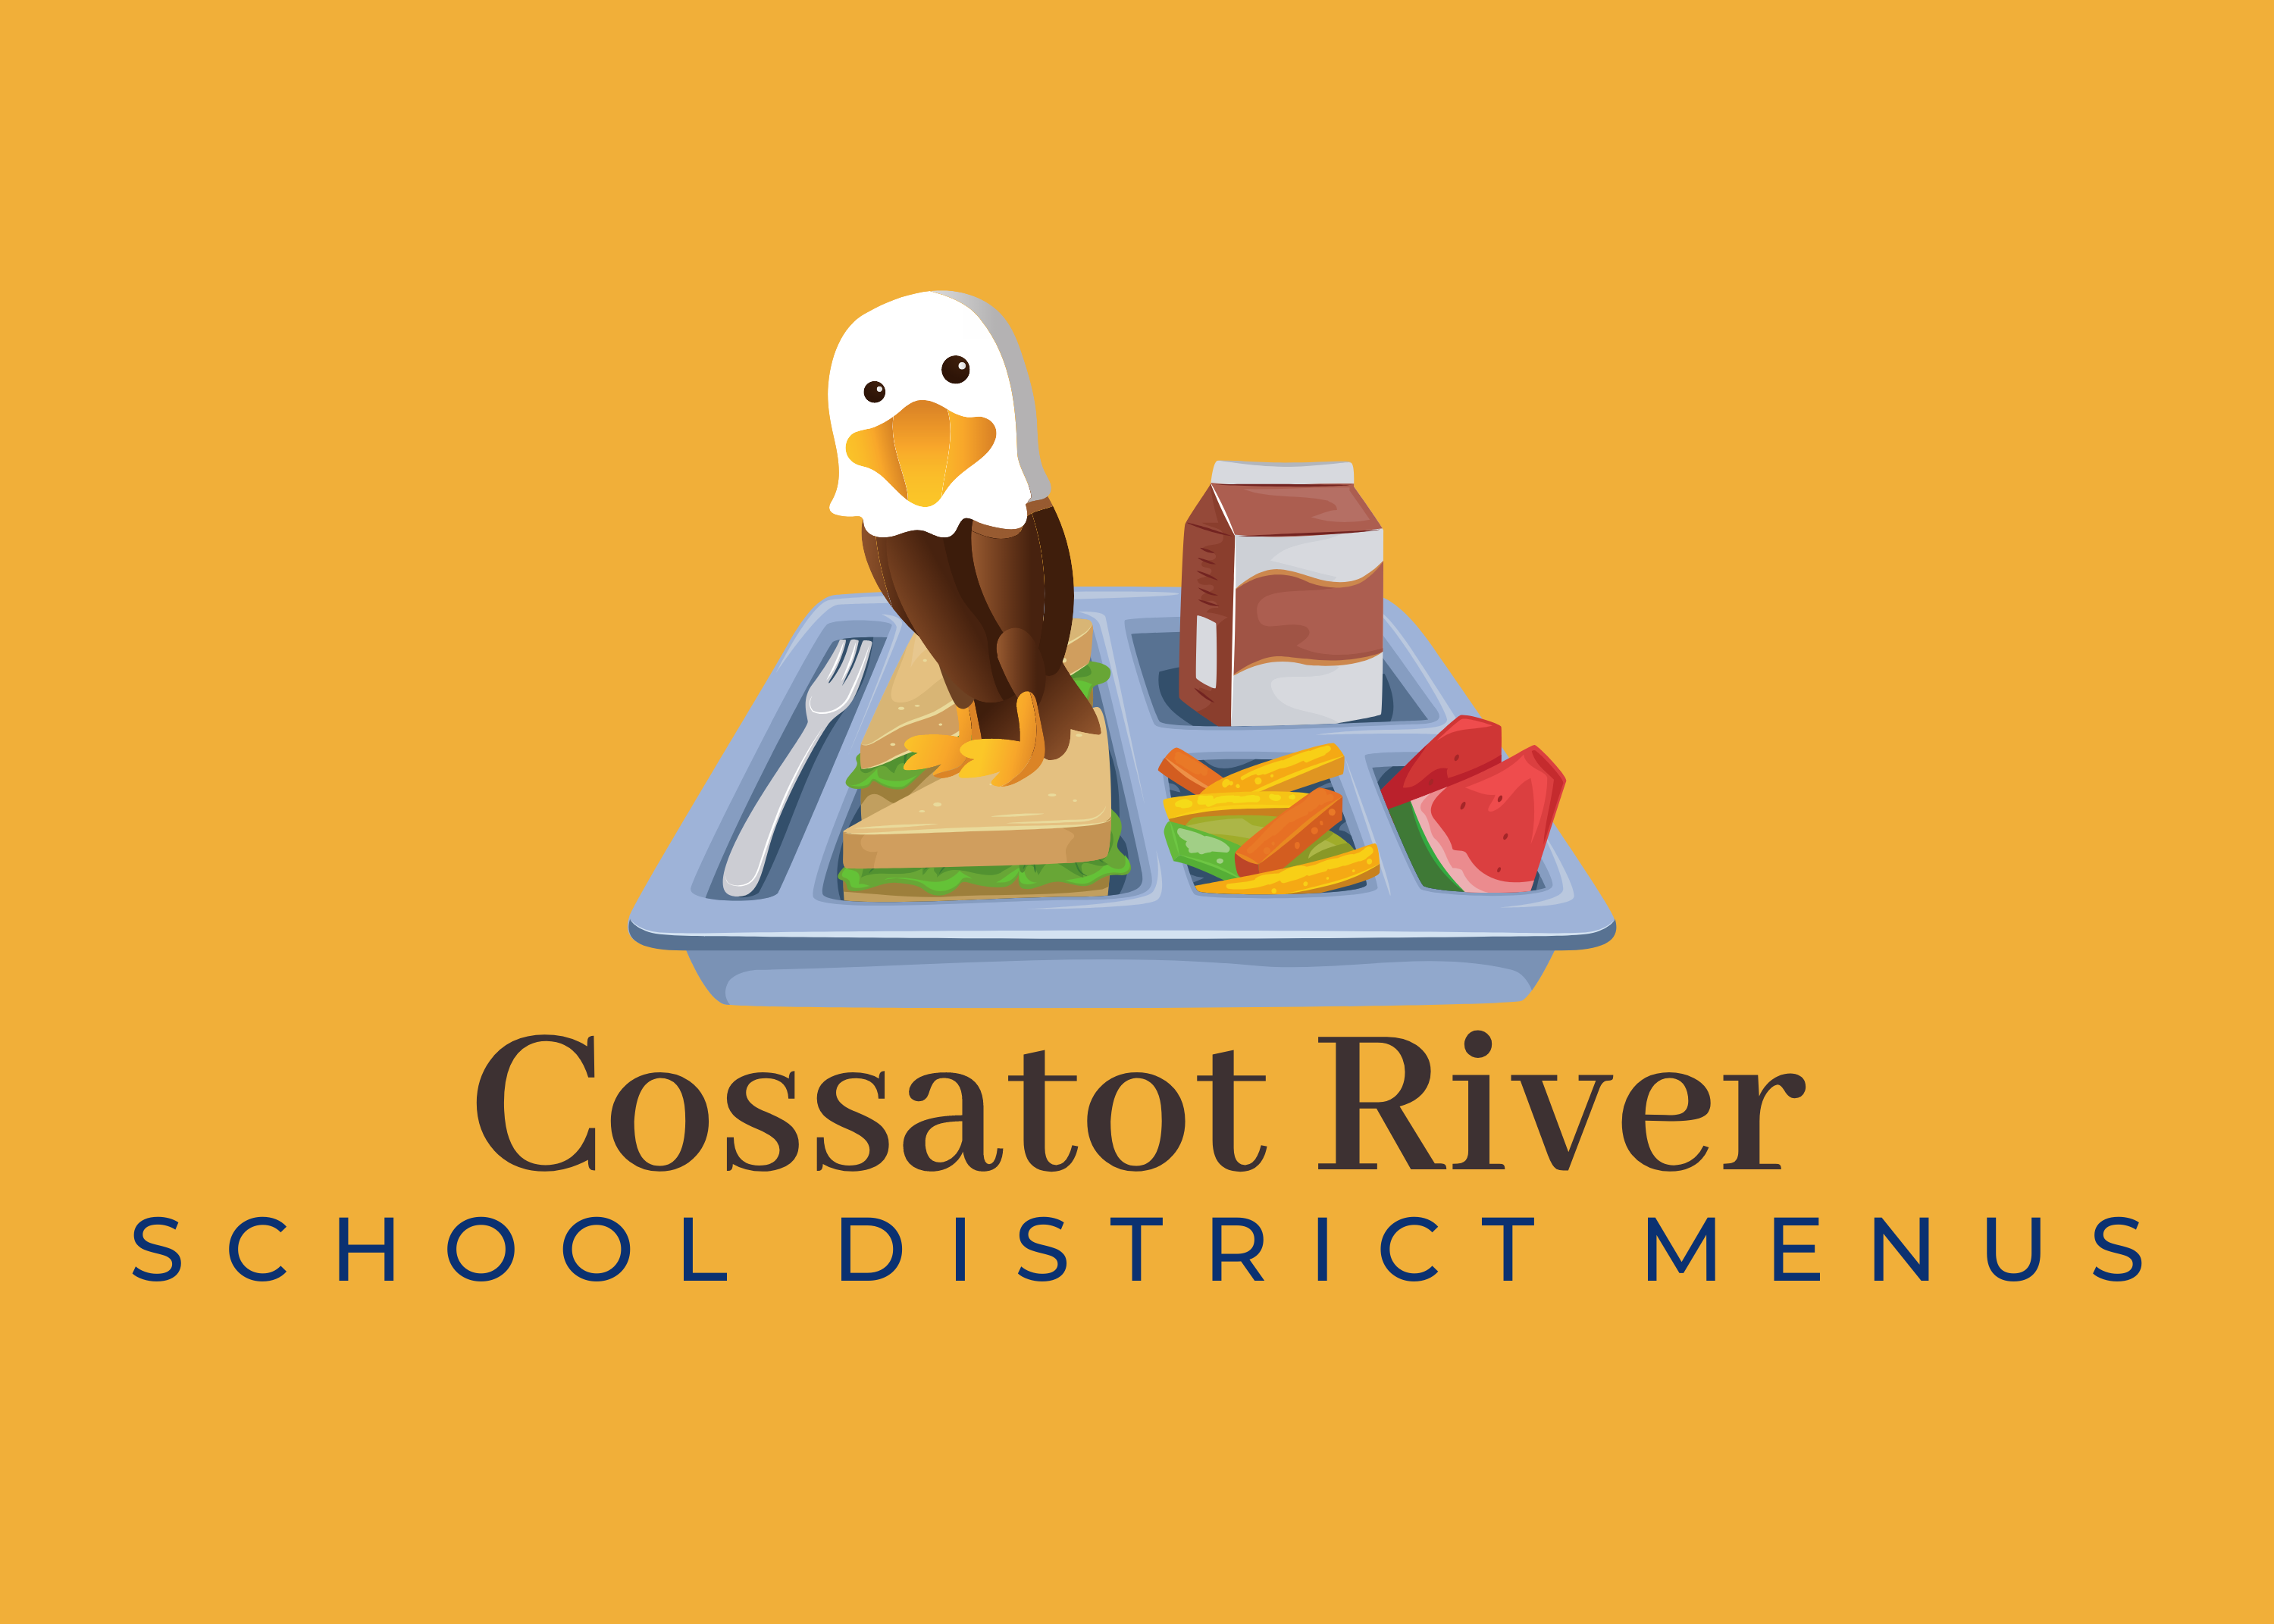 photo of a school lunch that says Cossatot River school district menus